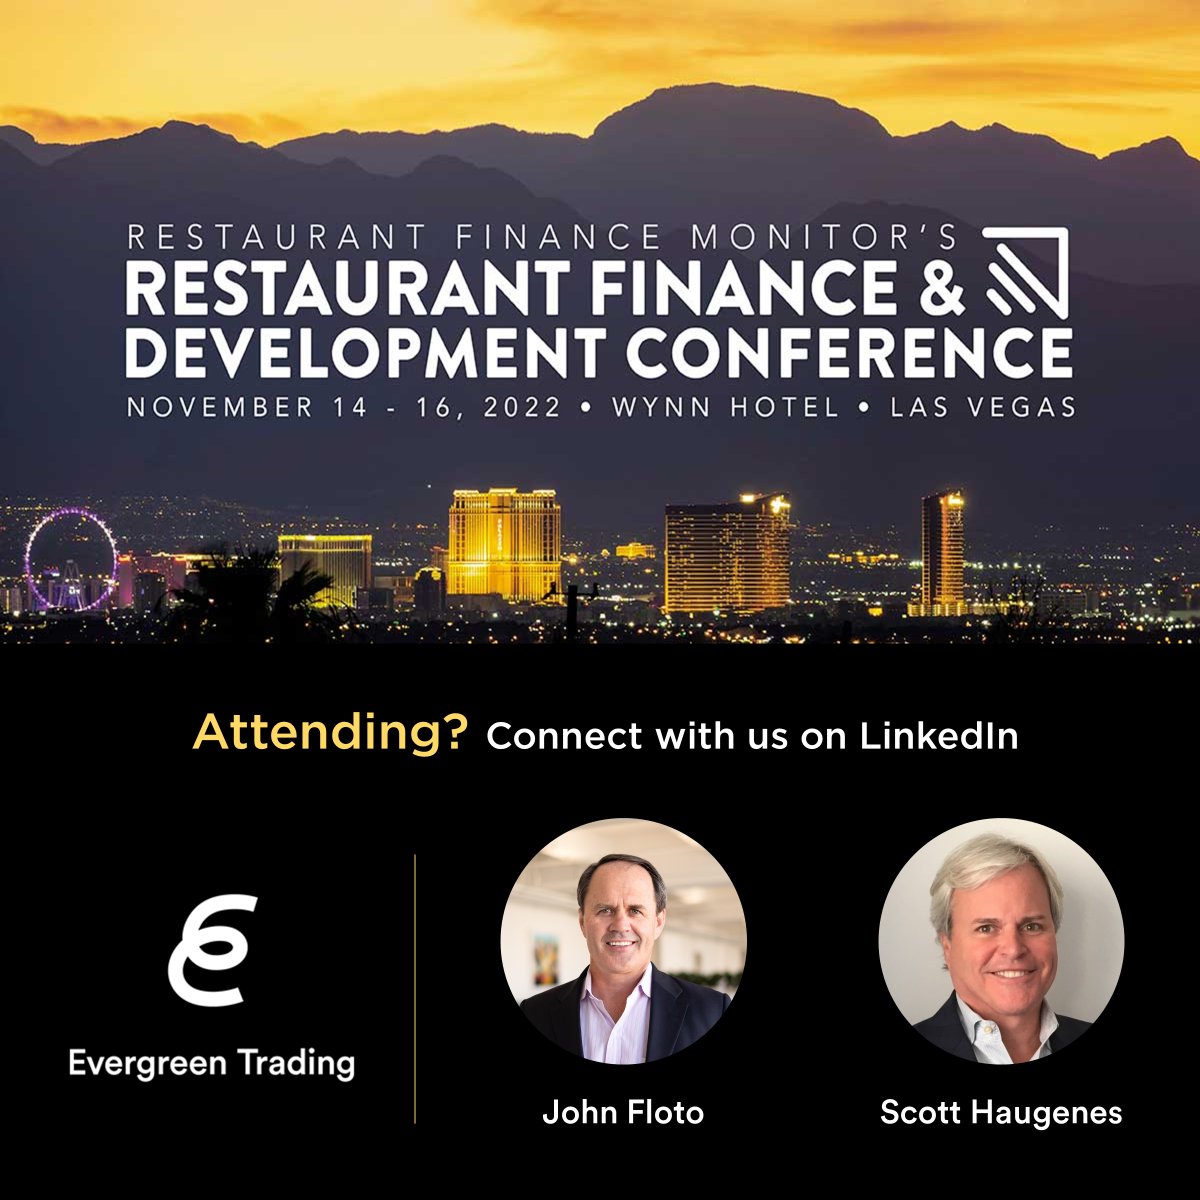 We'll see you next week at the @RestFinance Development Conference! #qsr #casualdining #fastcasual #restaurantfinancemonitor #restaurantbusiness #inventorysolutions #ROIsolutions